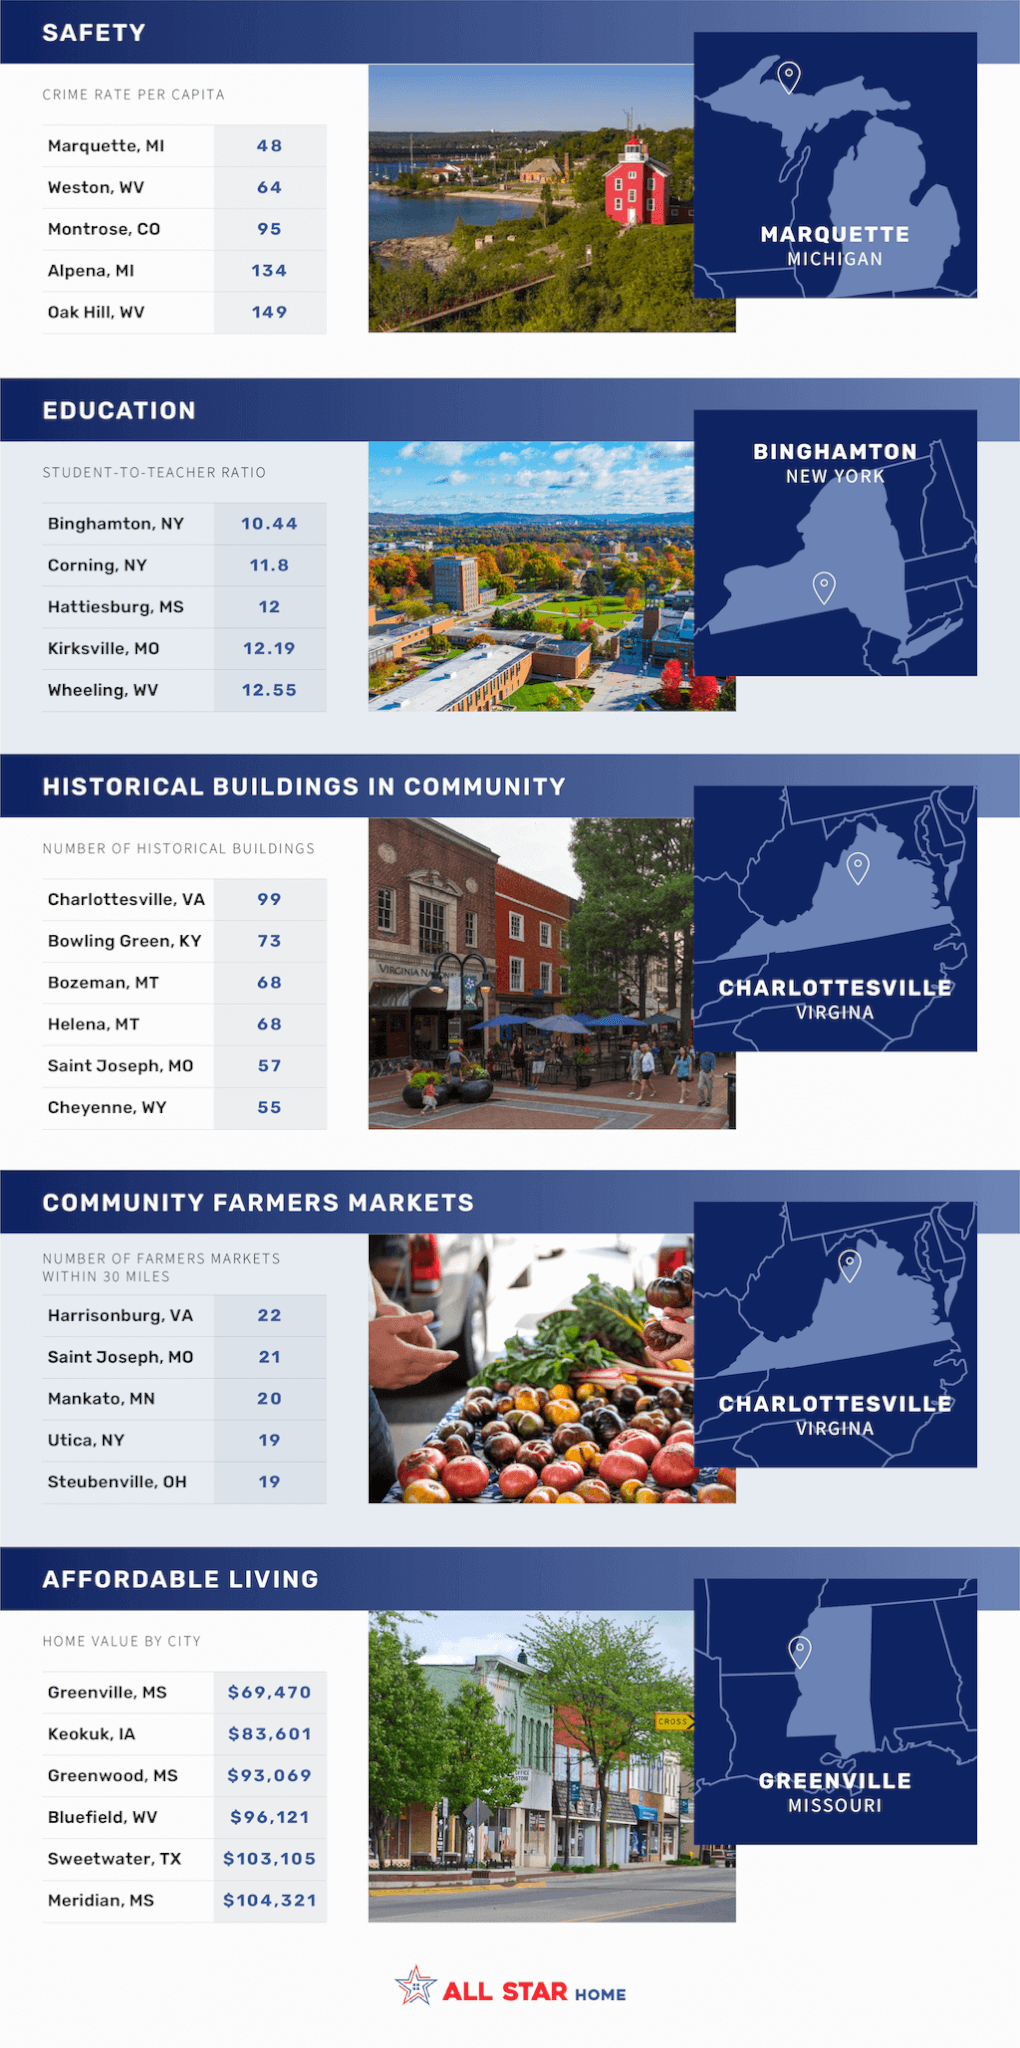 Key rankings for specific categories used to determine America's Best Small Cities and Towns